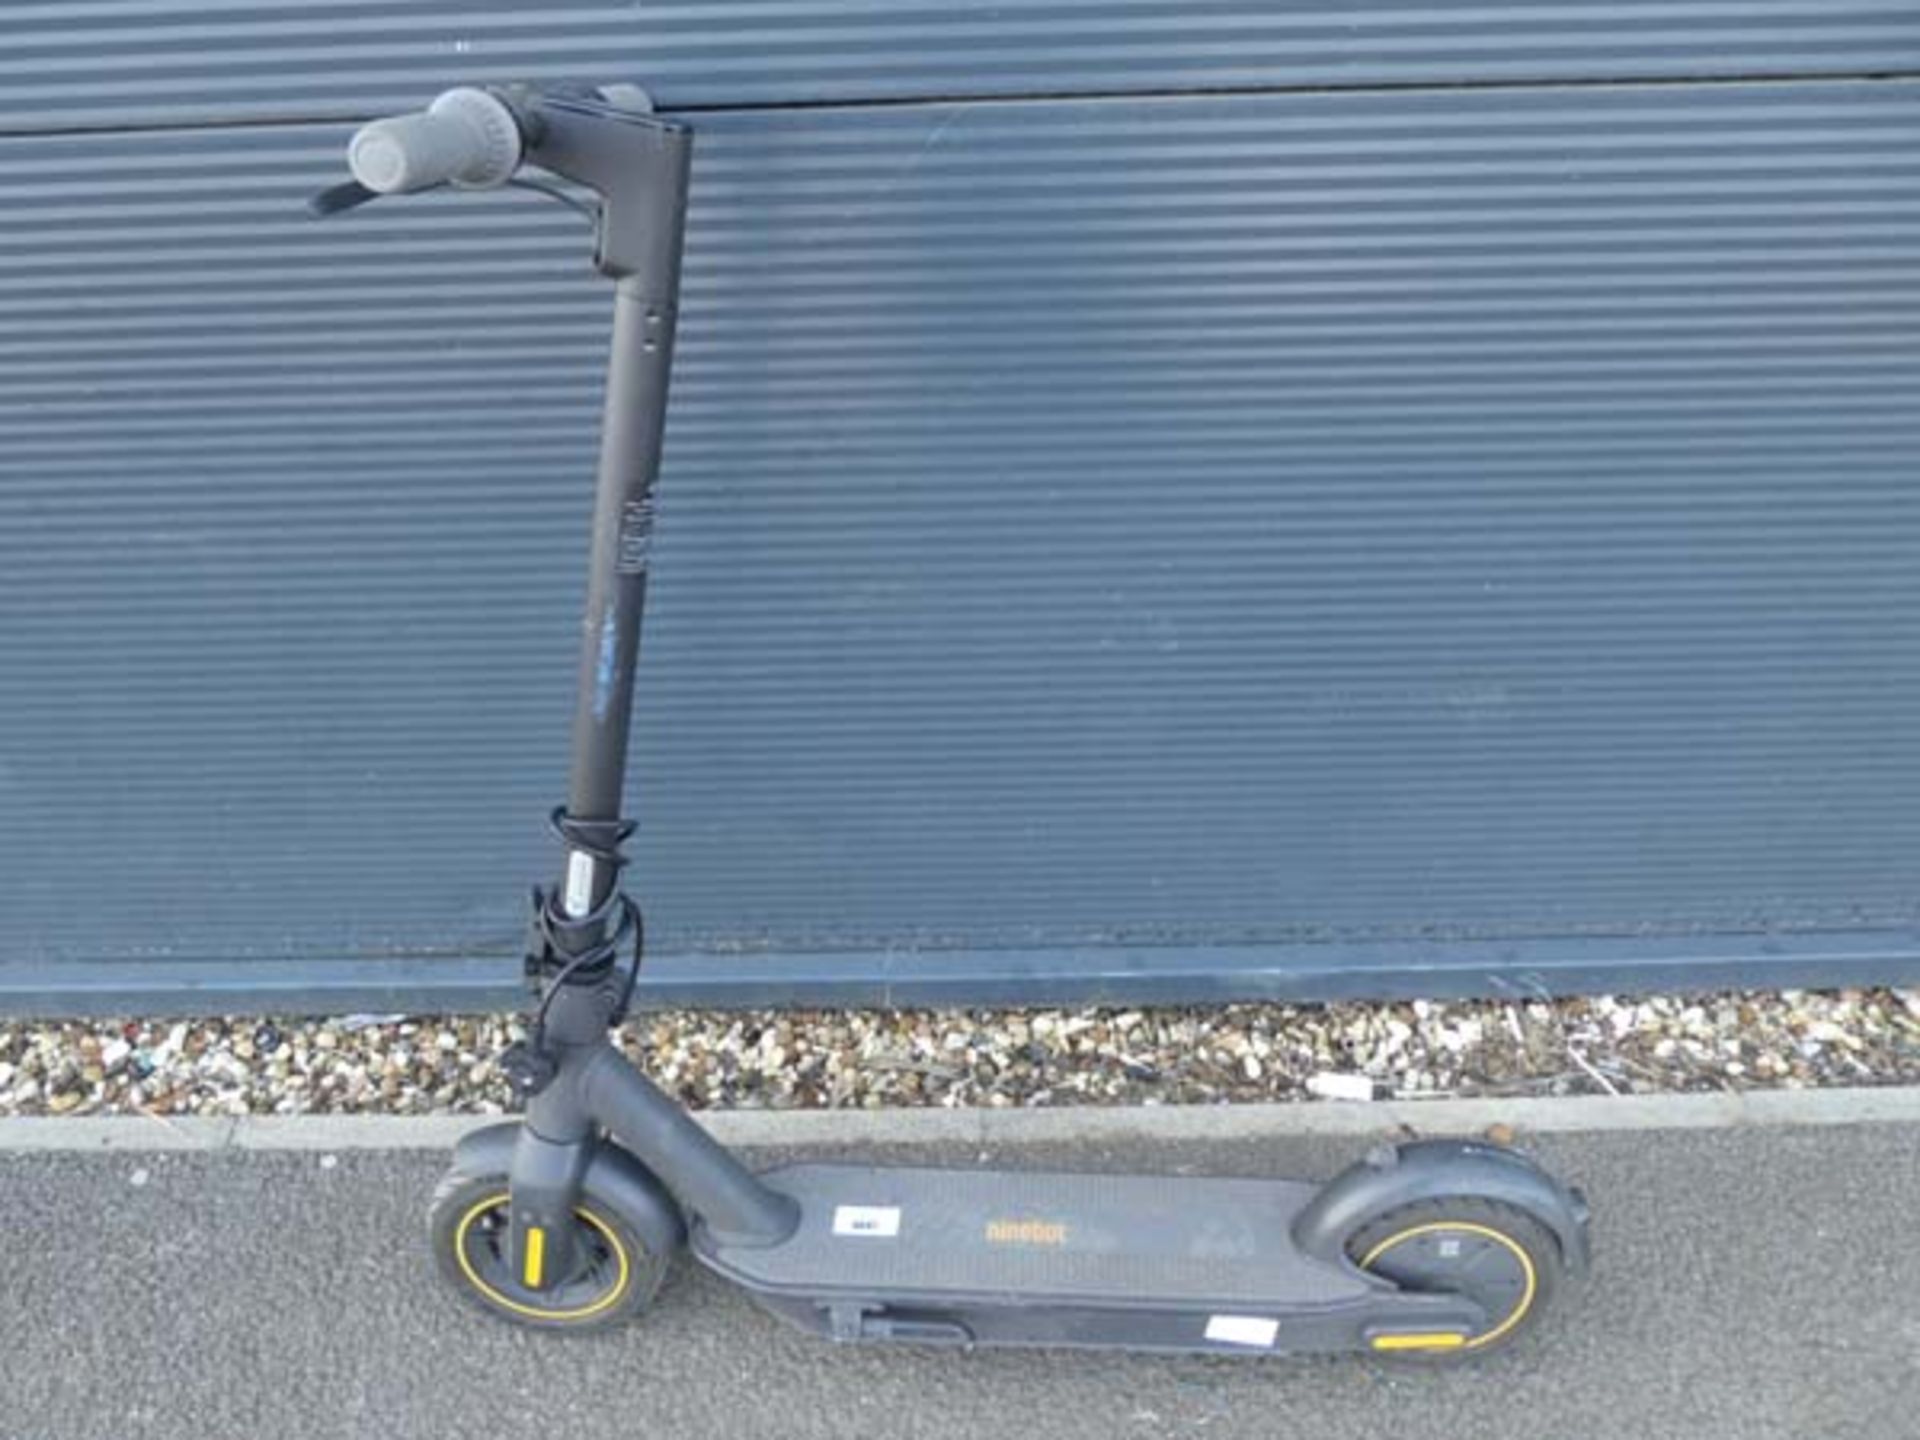 Ninebot electric scooter with charging lead